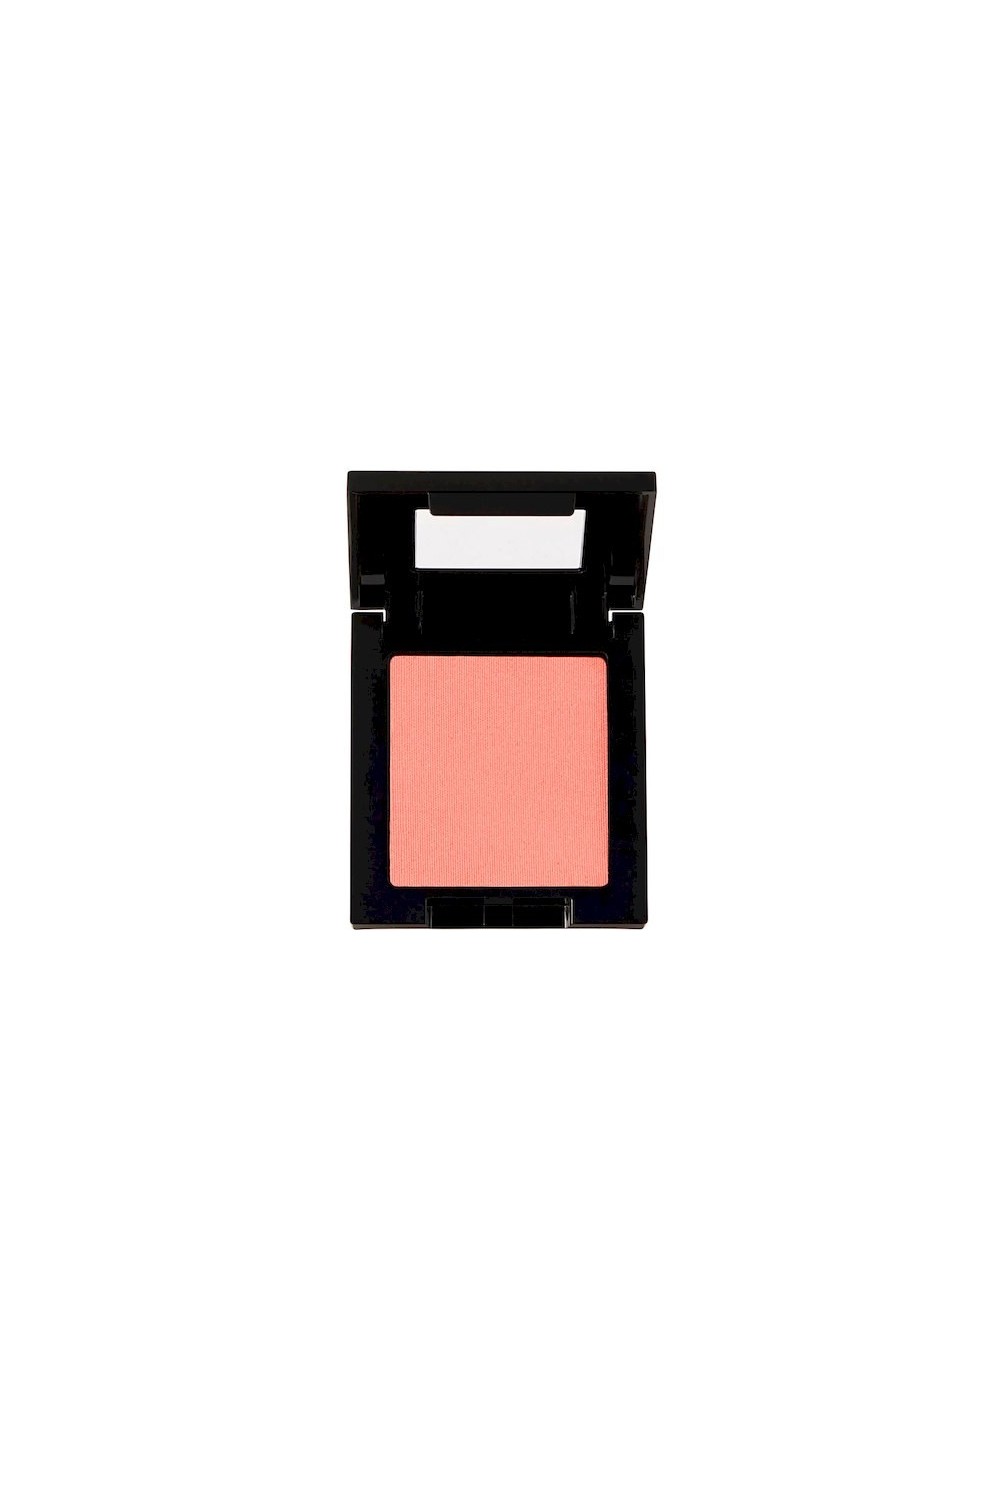 Maybelline Fit Me Blush 25 Pink 5g